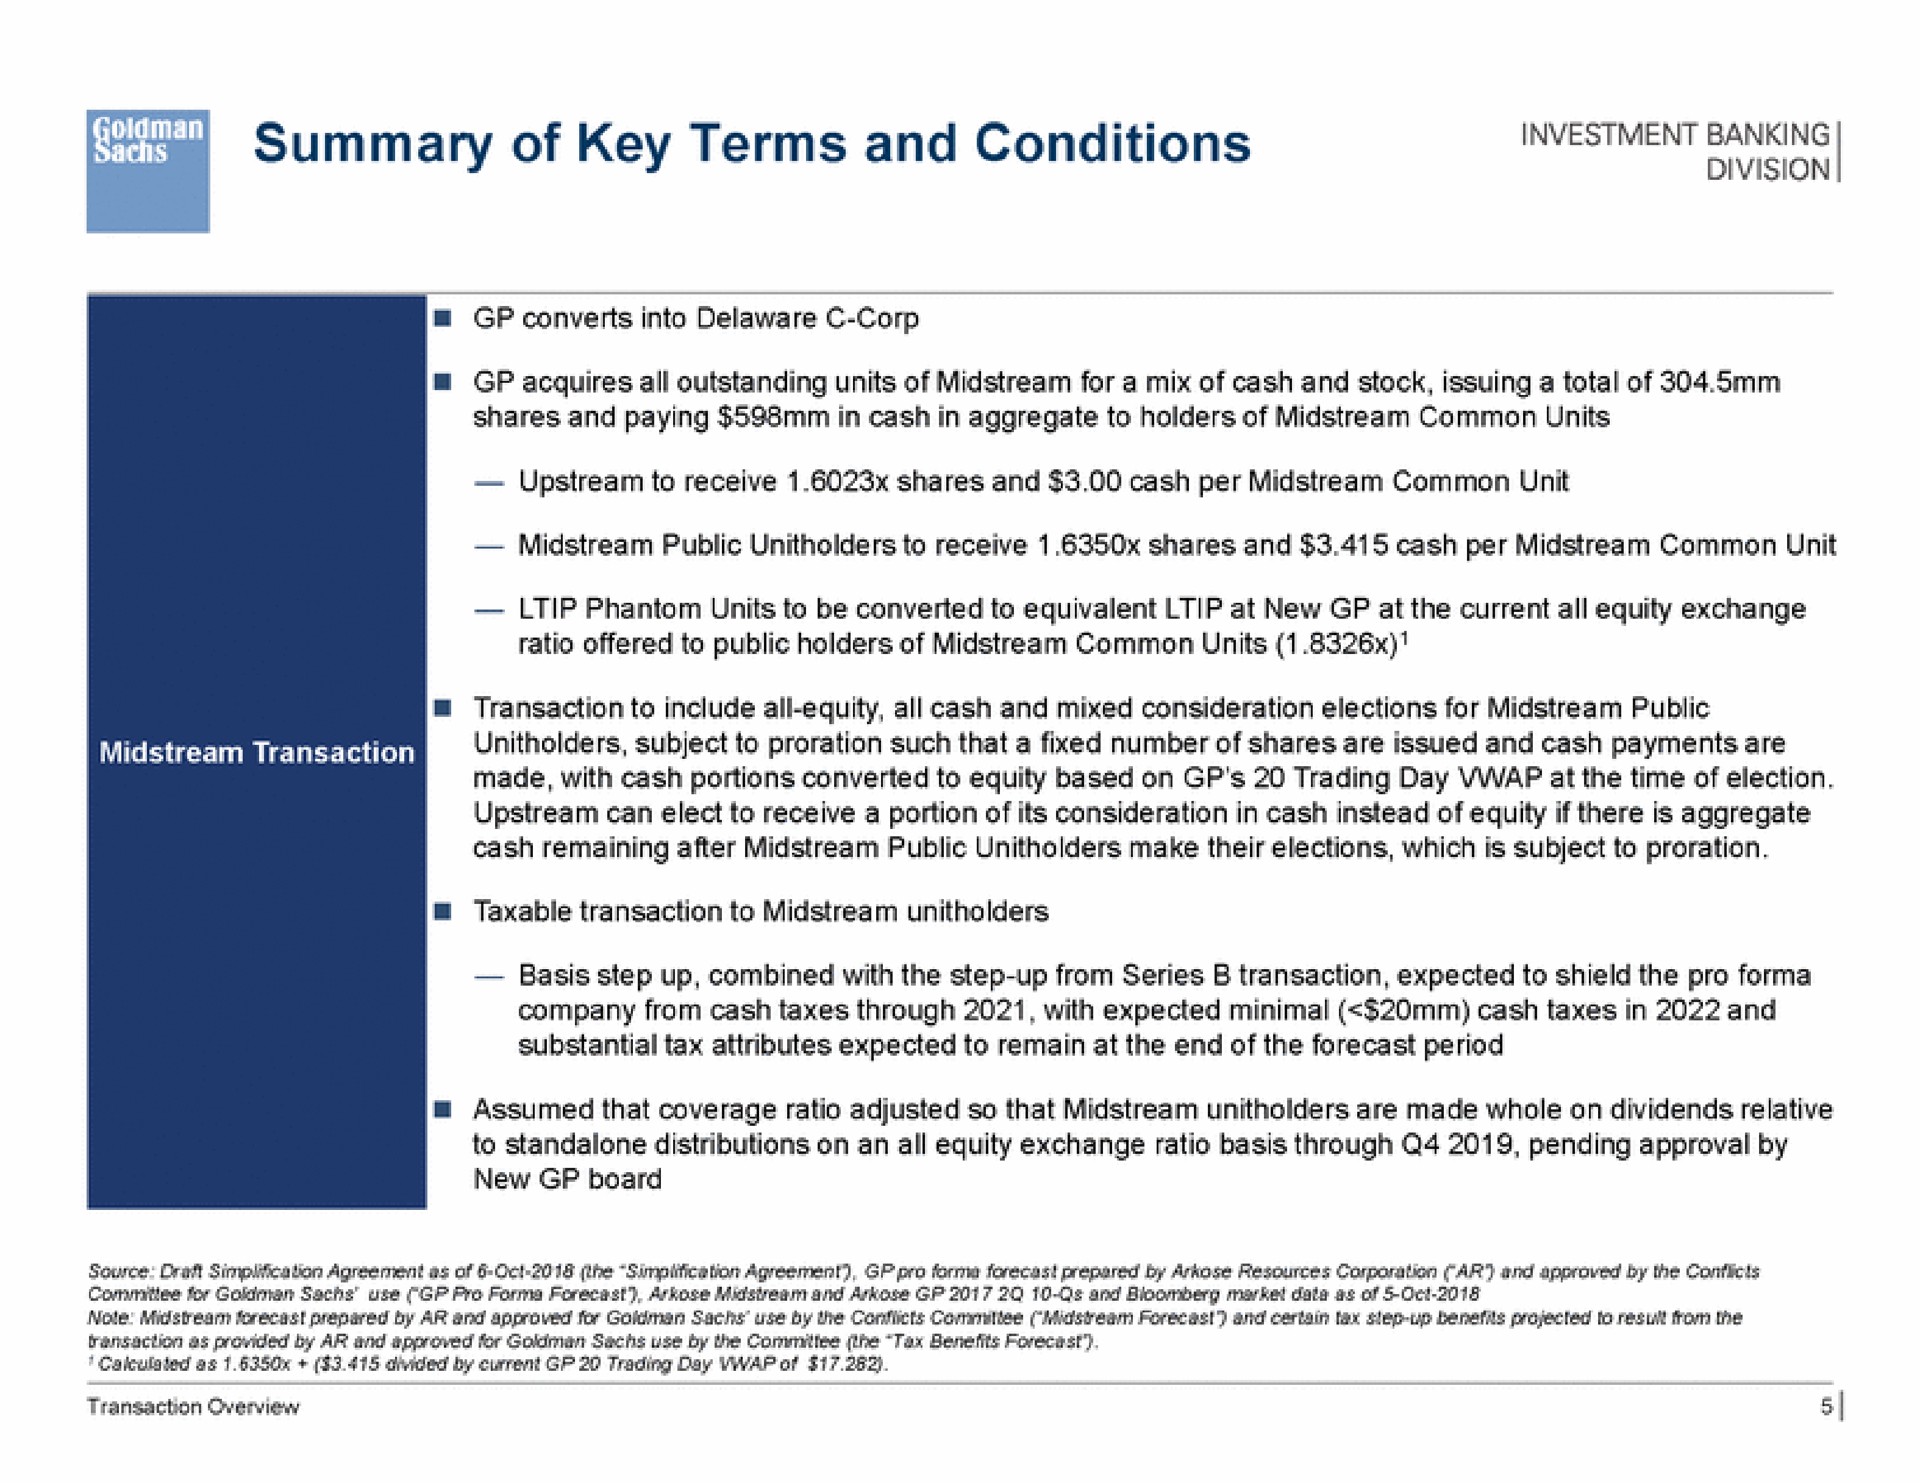 summary of key terms and conditions investment banking | Goldman Sachs